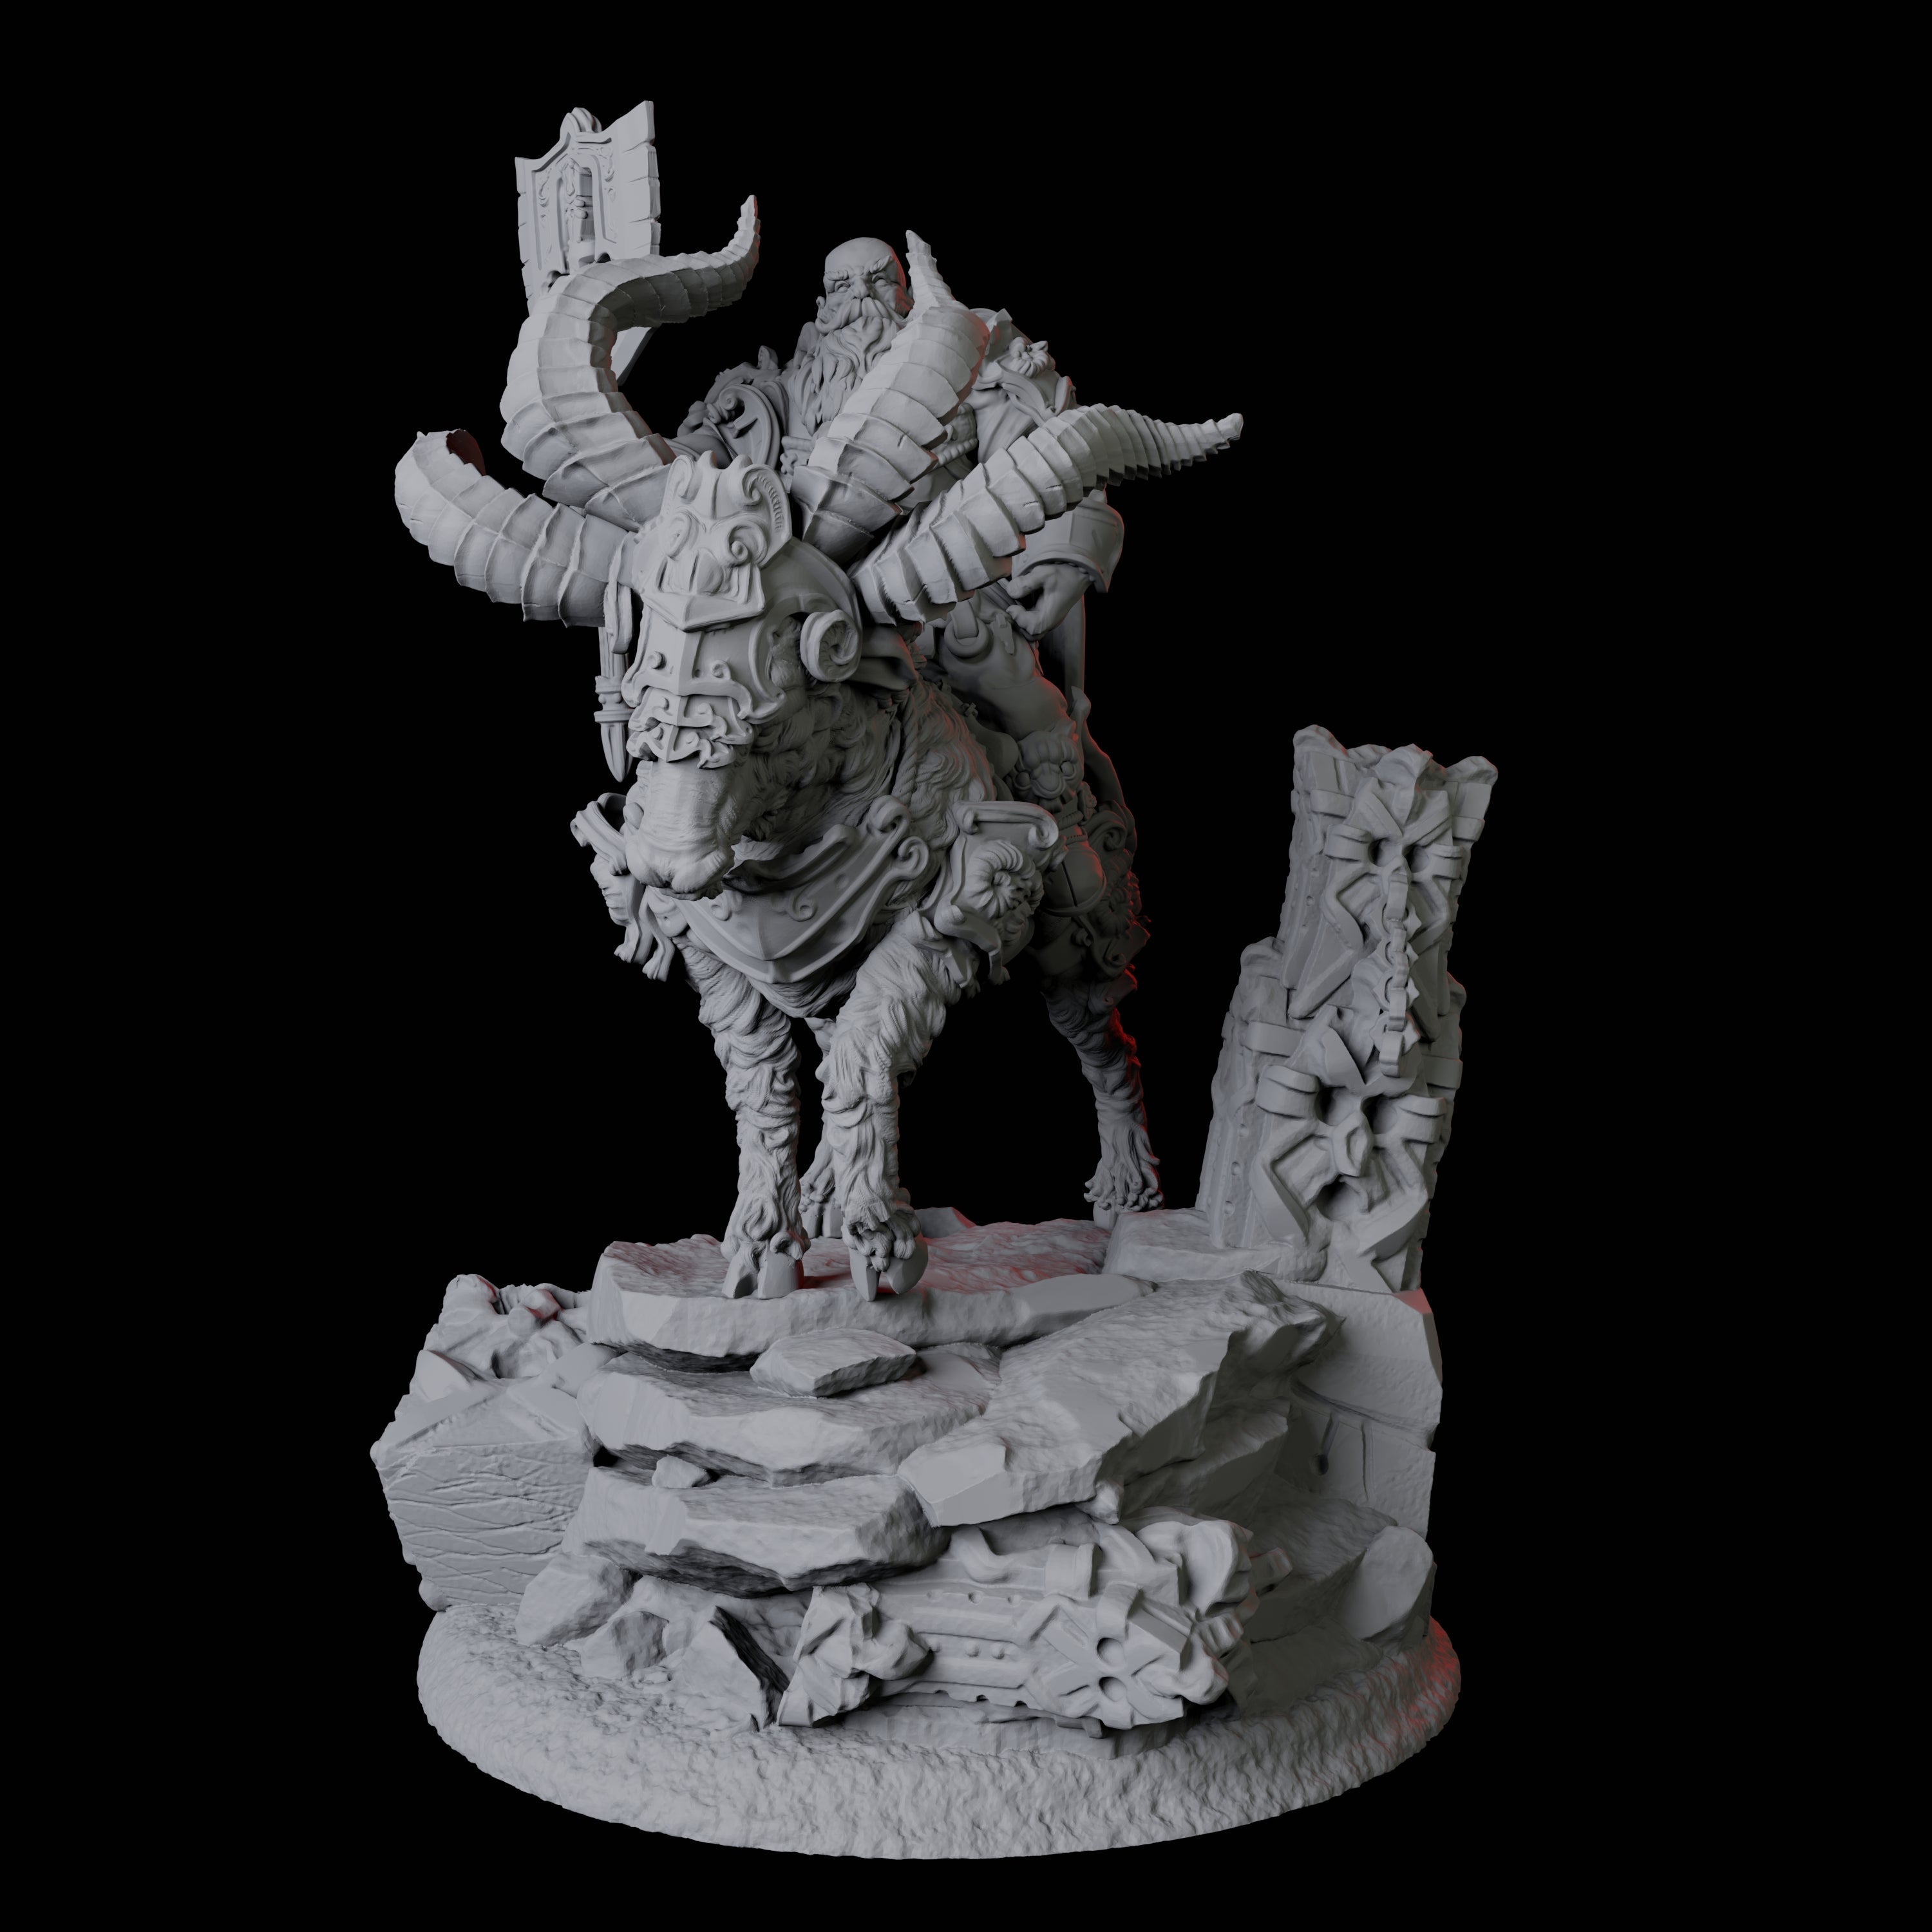 Goat Mounted Dwarf Warrior B Miniature for Dungeons and Dragons, Pathfinder or other TTRPGs